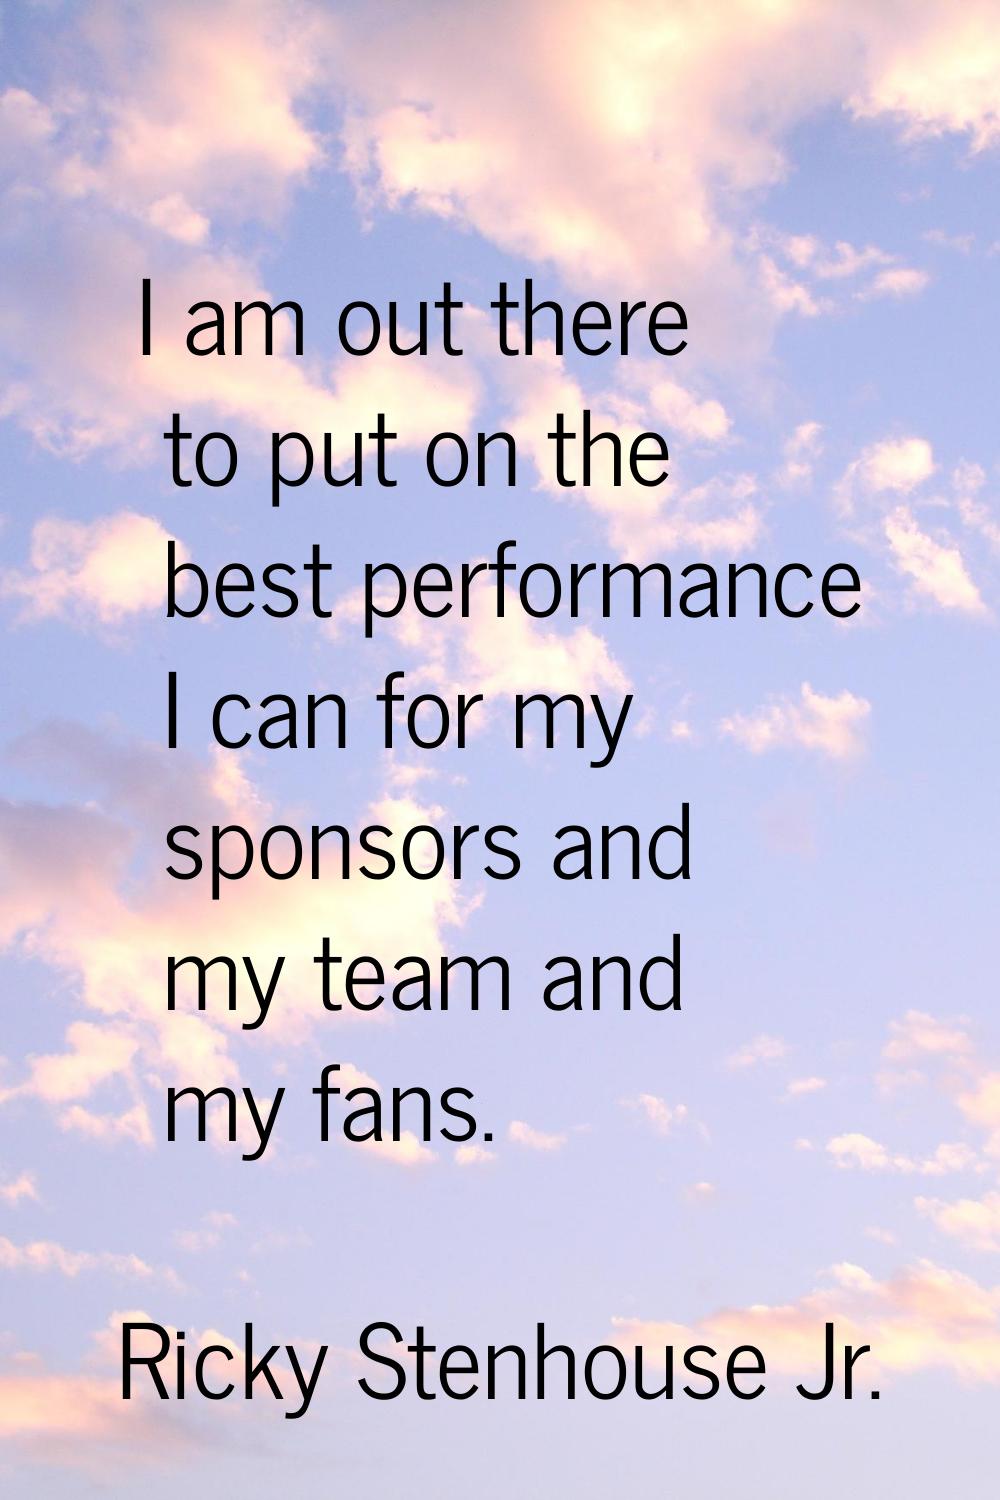 I am out there to put on the best performance I can for my sponsors and my team and my fans.